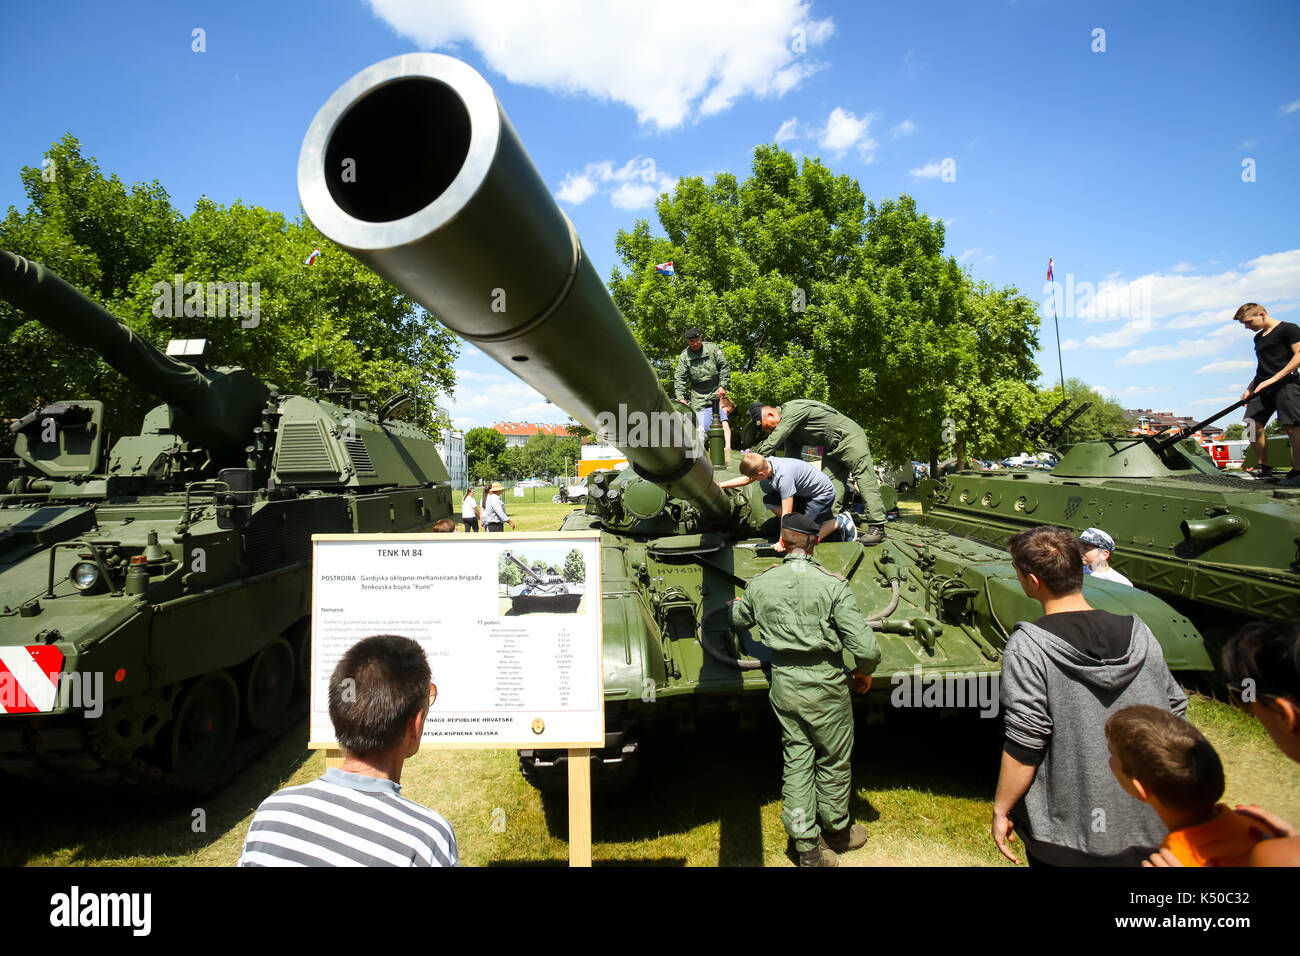 ZAGREB, CROATIA - MAY 28, 2017 : People sightseeing tank M 84 exposed at 26th anniversary of the formation of the Croatian Armed Forces on Lake Jarun Stock Photo